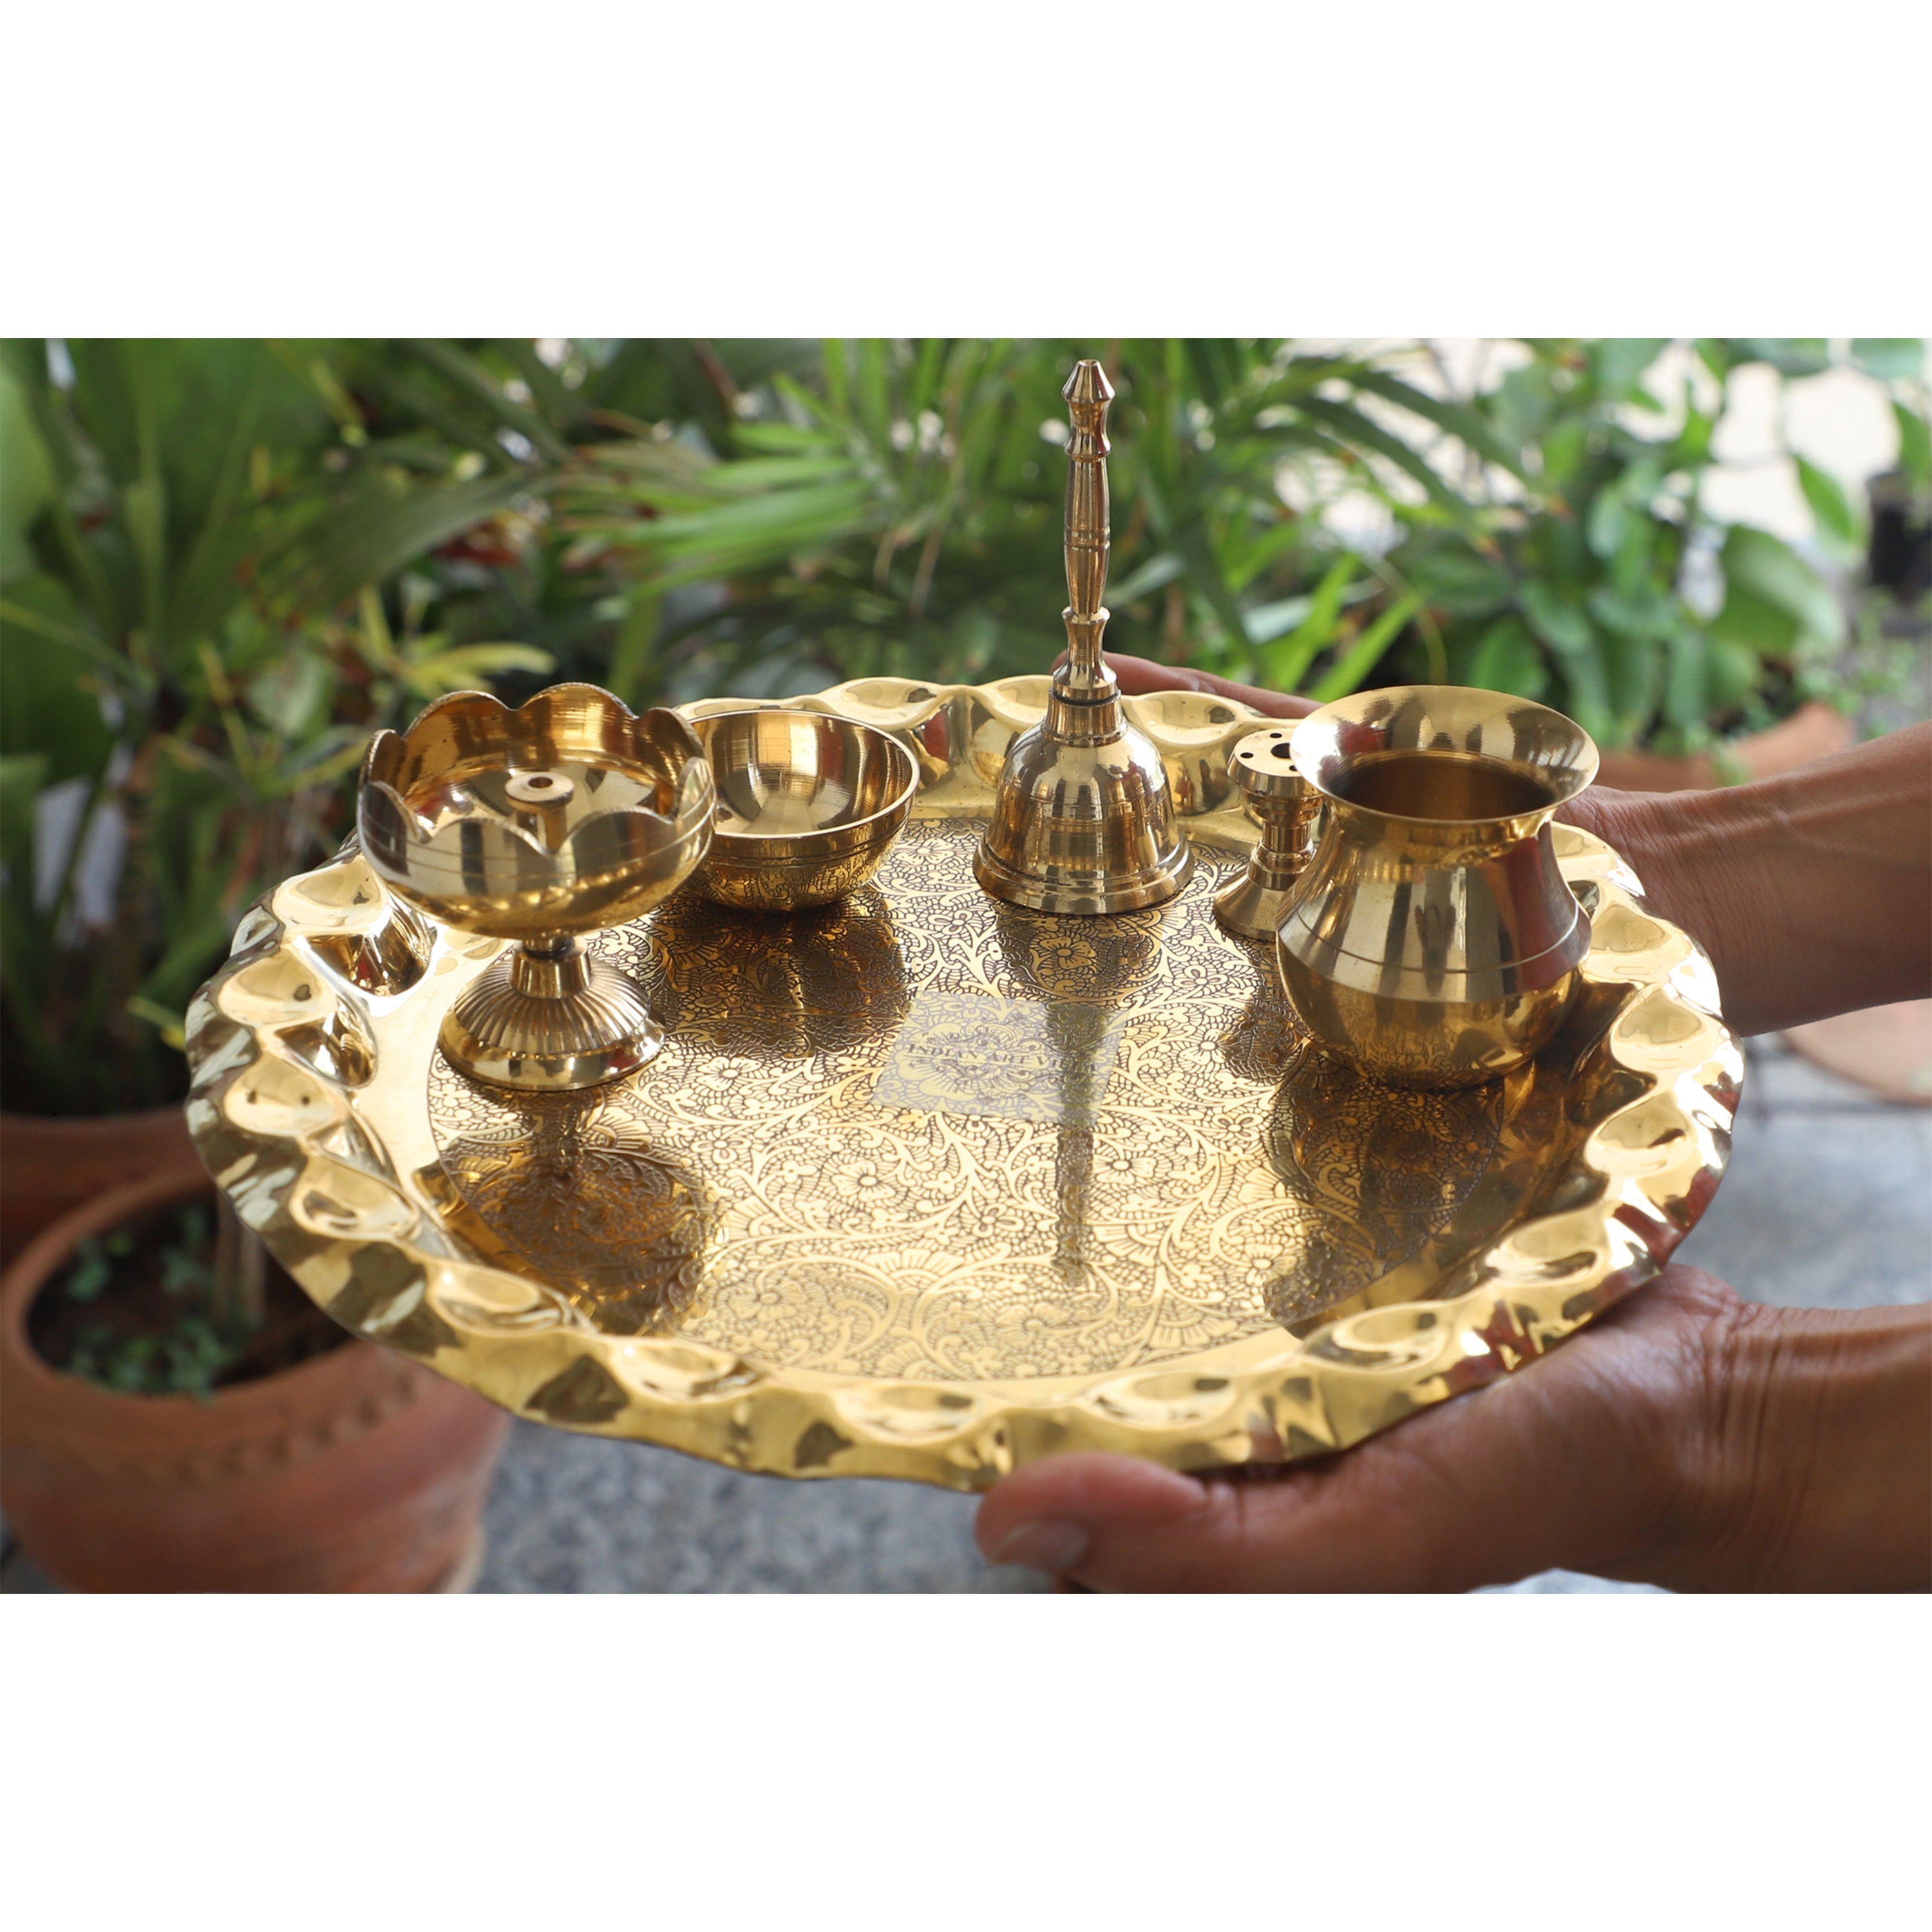 Buy 12 Pcs Brass Pooja Thali Set Online at Best Price in India on